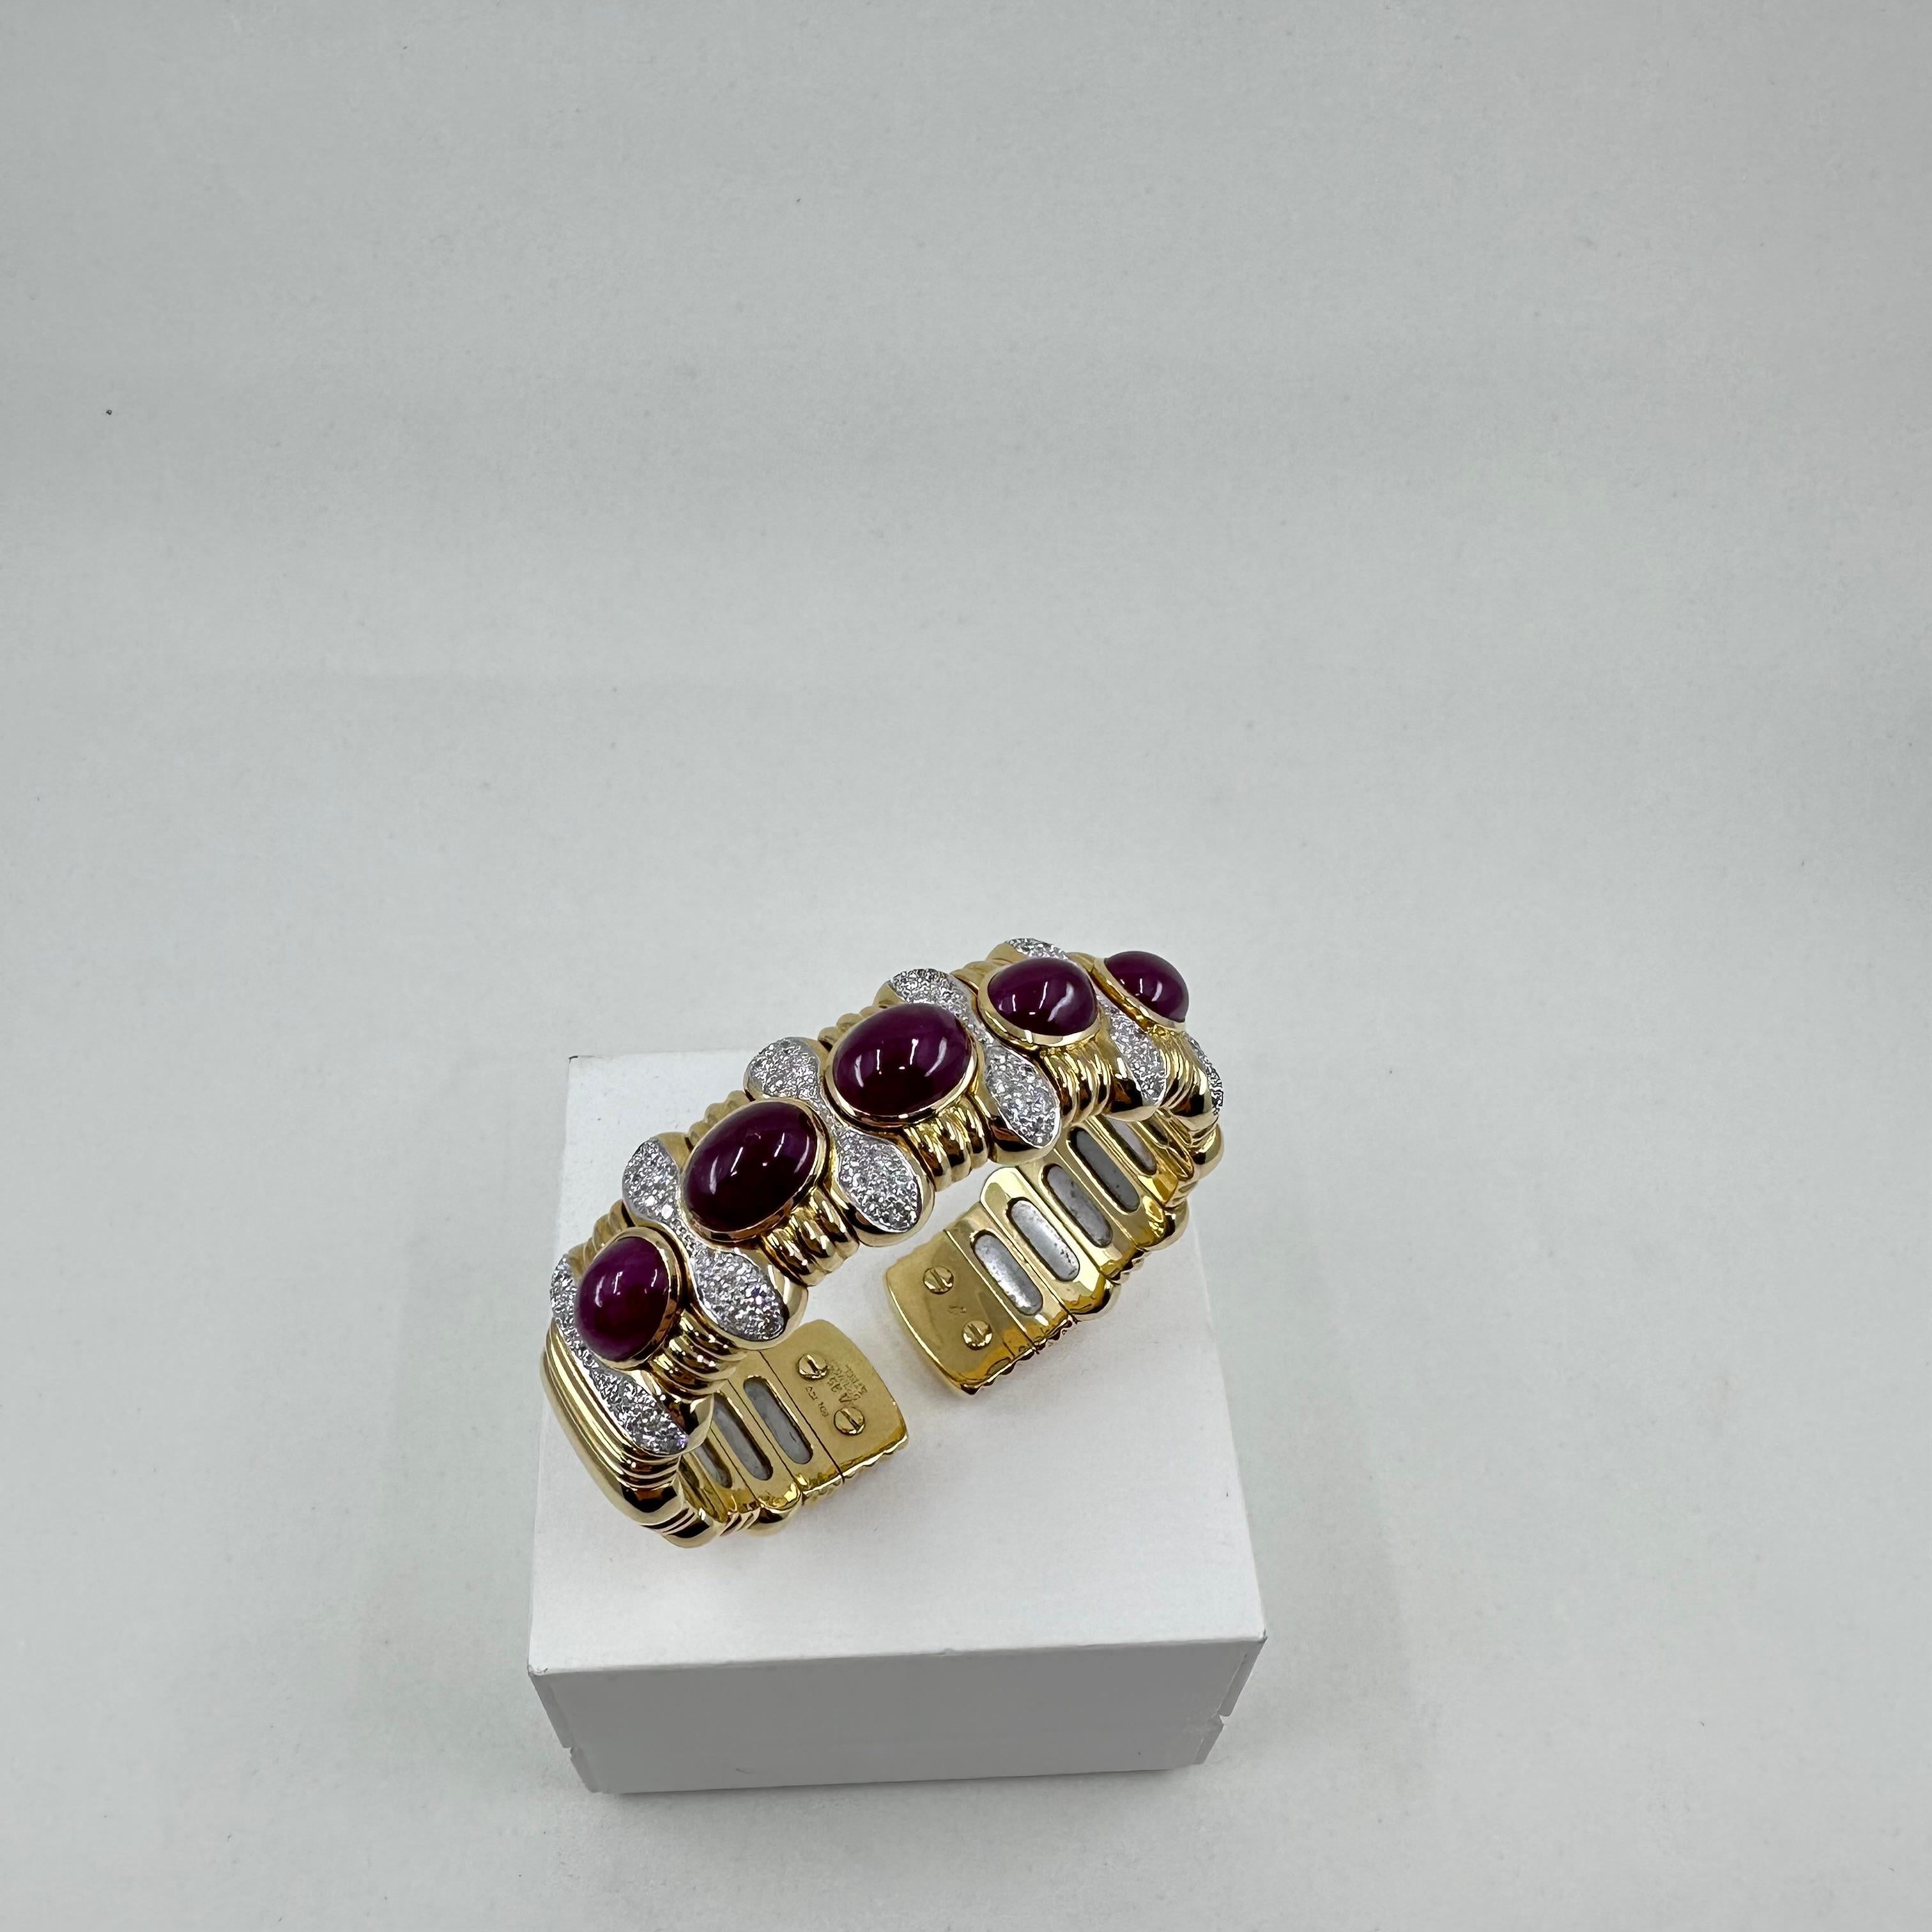 Substantial 18 karat yellow gold wide cuff bracelet containing five large cabochon rubies approximately 25 carats total weight and numerous white clean diamonds and 3.00 cts total weight of Round Diamonds 
Bracelet will fit a medium to large wrist